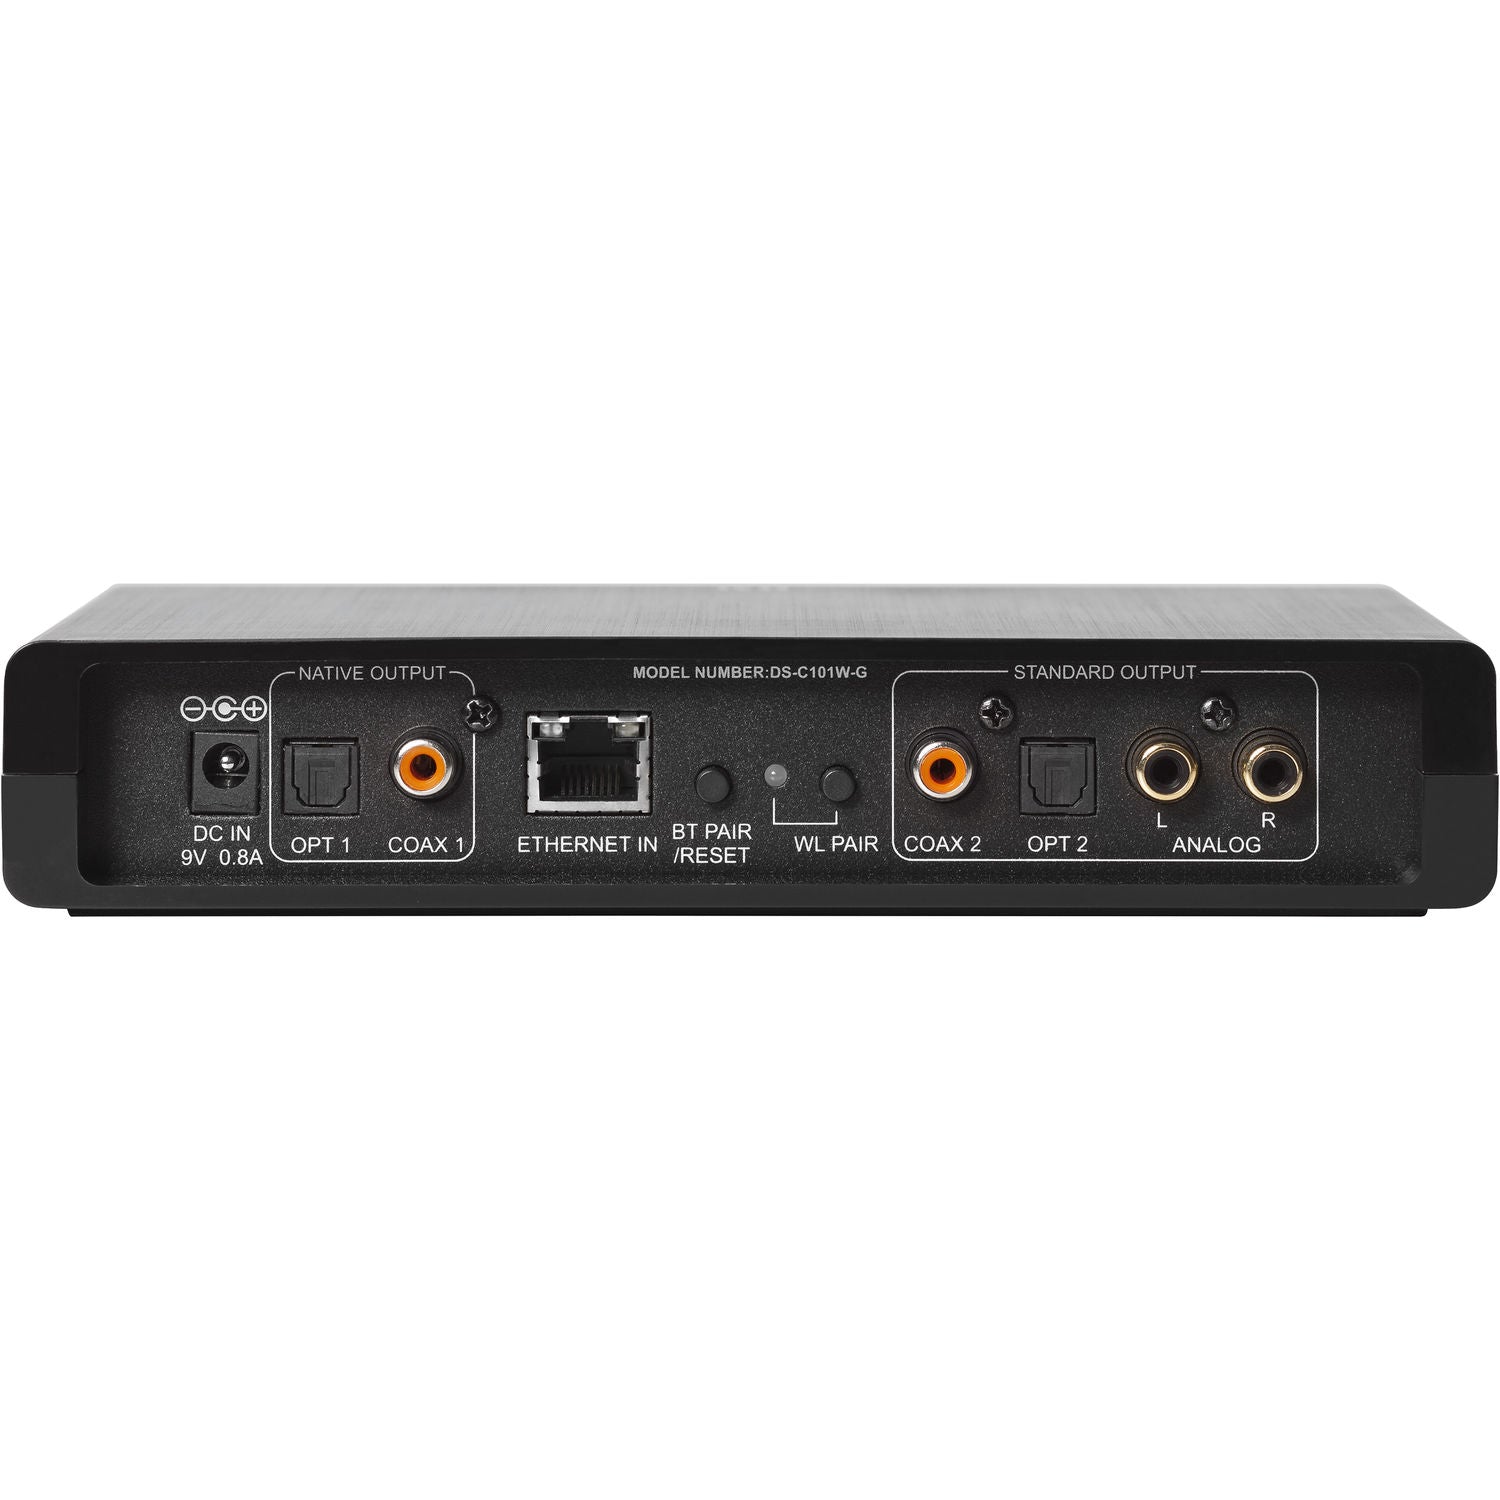 ELAC Discovery DS-C101W-G Connect